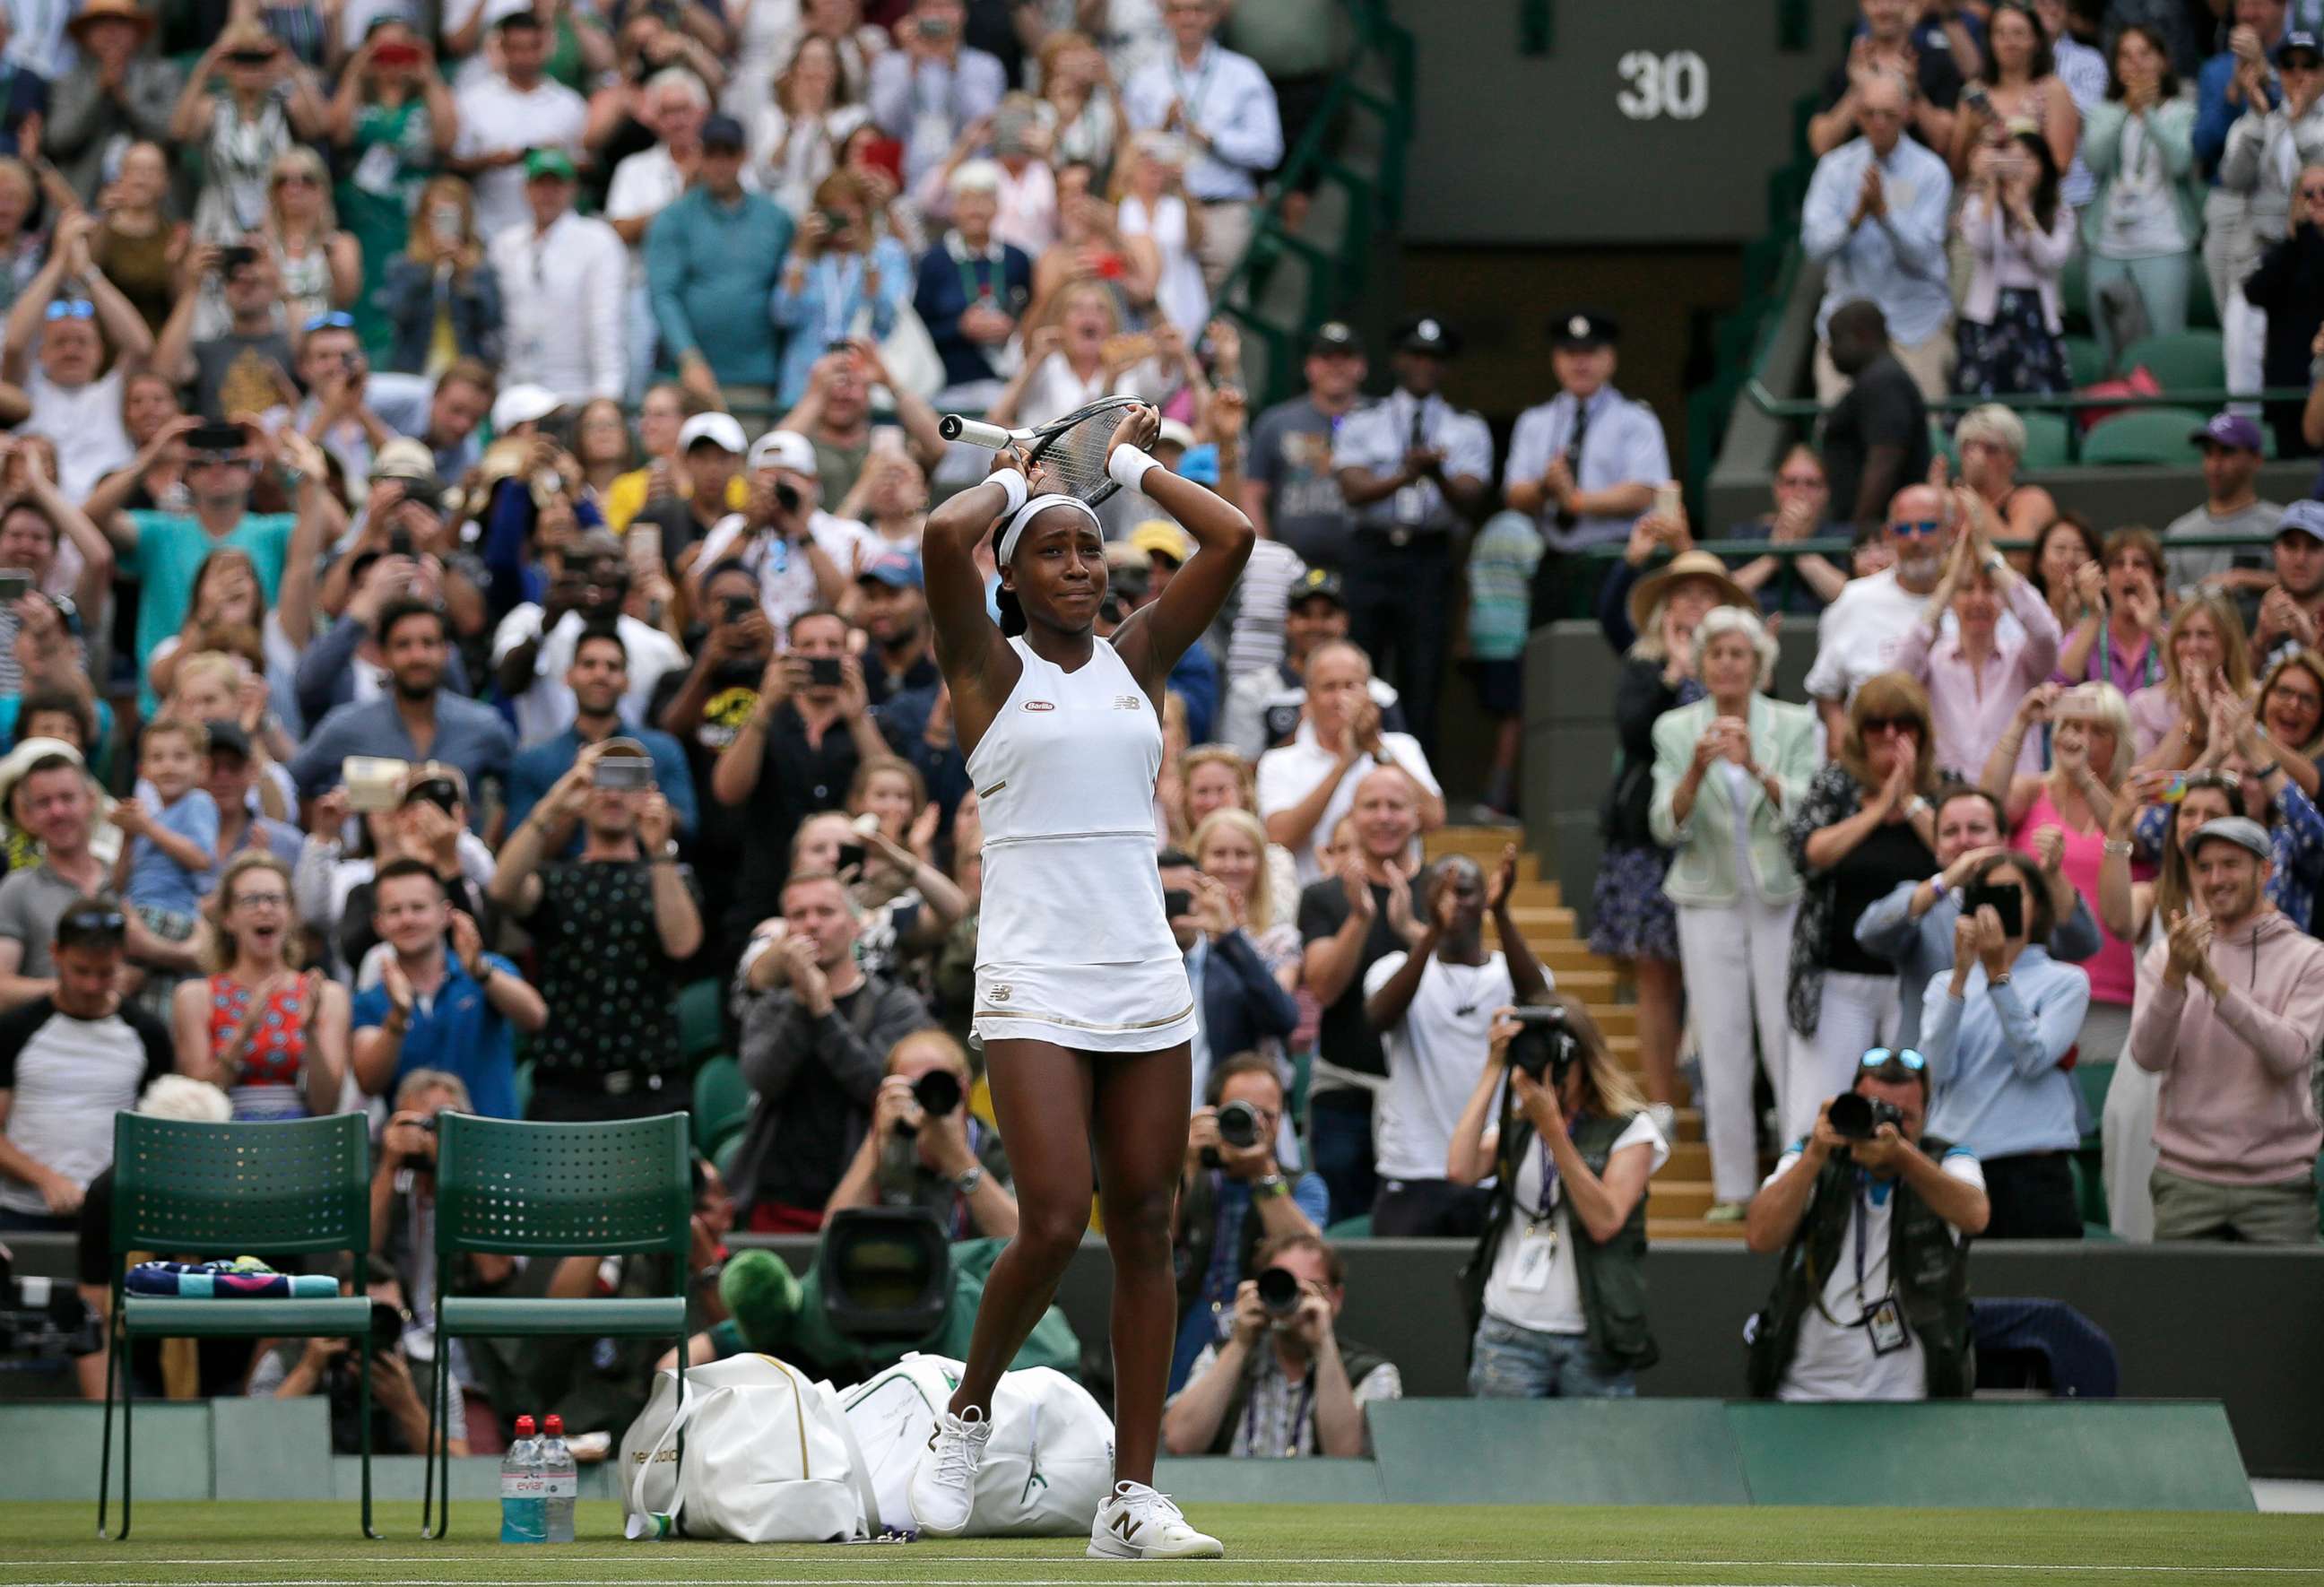 PHOTO: United States' Cori "Coco" Gauff reacts after beating United States's Venus Williams in a Women's singles match during day one of the Wimbledon Tennis Championships in London, July 1, 2019.